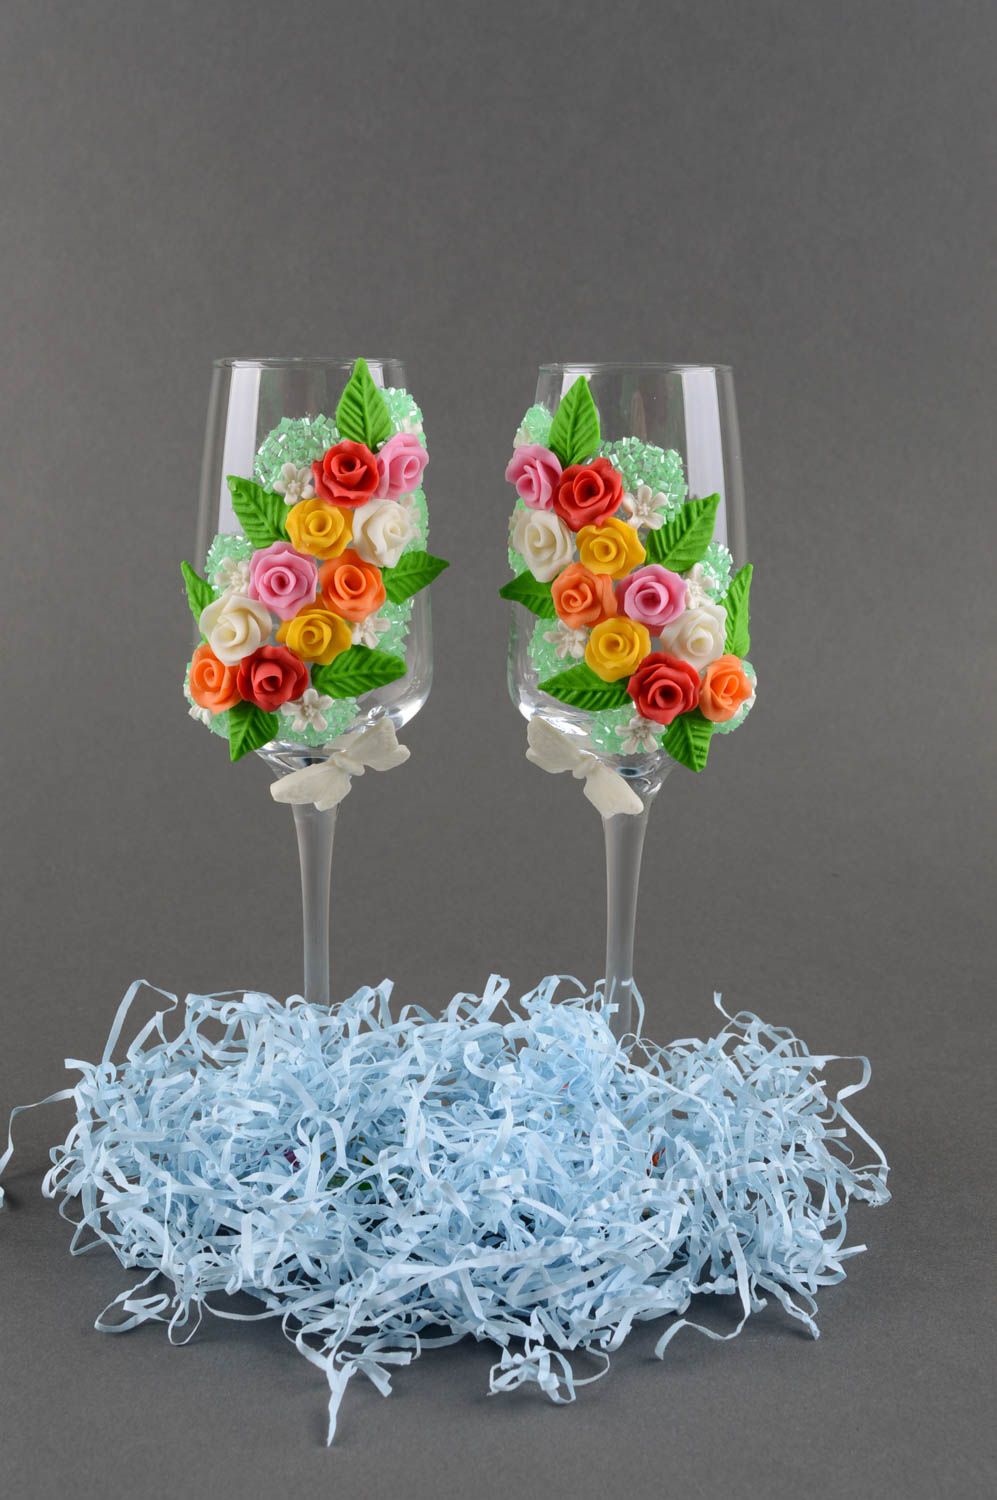 Decorated wine glasses 200 ml wedding decor handmade champagne flutes cool gifts photo 1